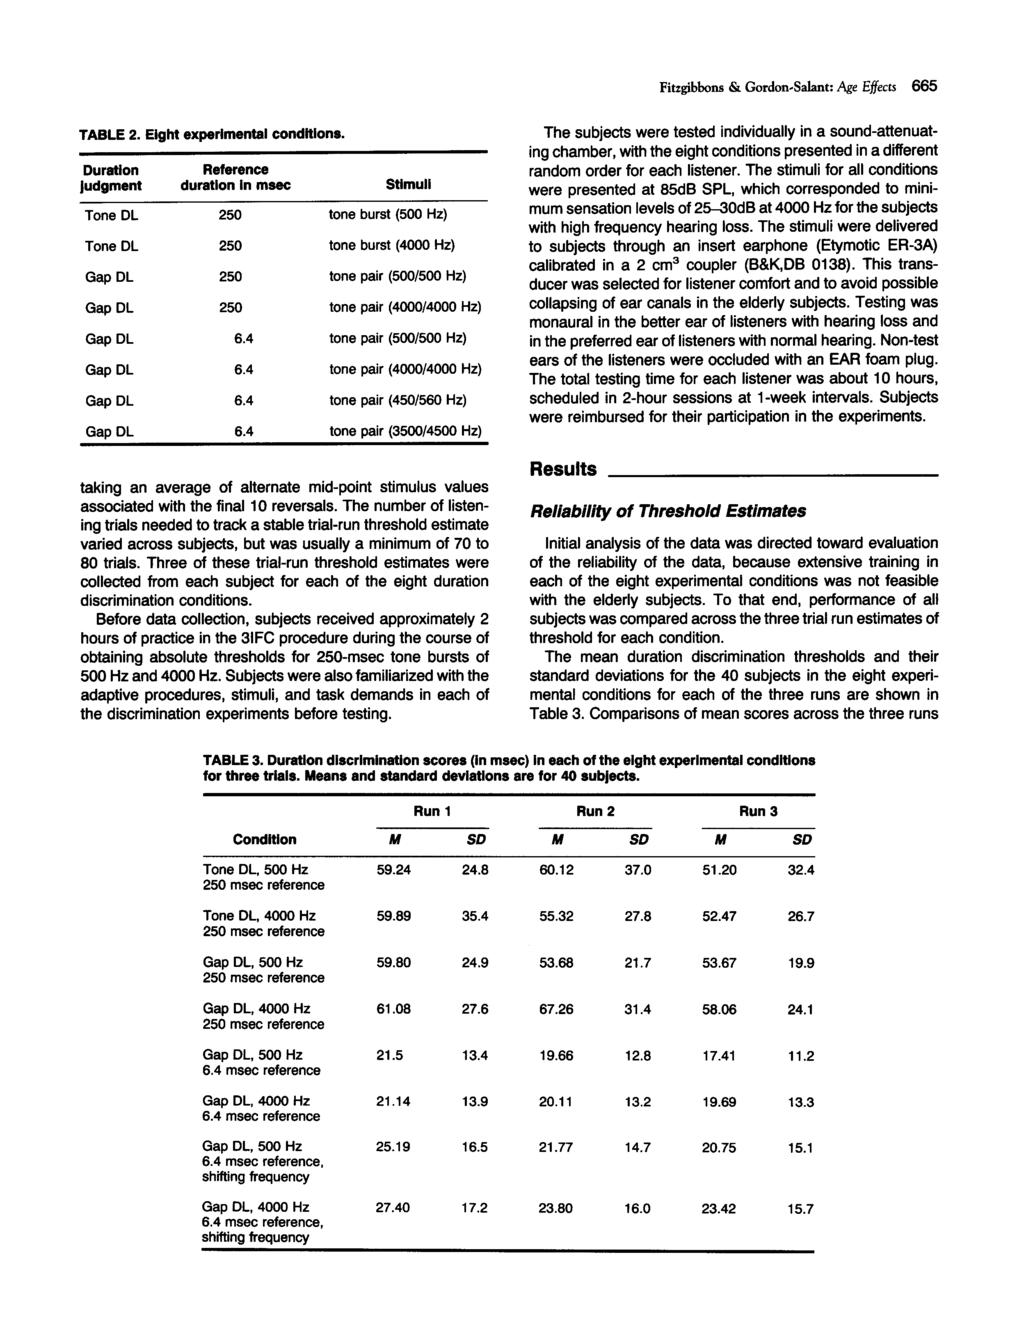 Fitzgibbons & Gordon-Salant: Age Effects 665 TABLE 2. Eight experimental conditions.